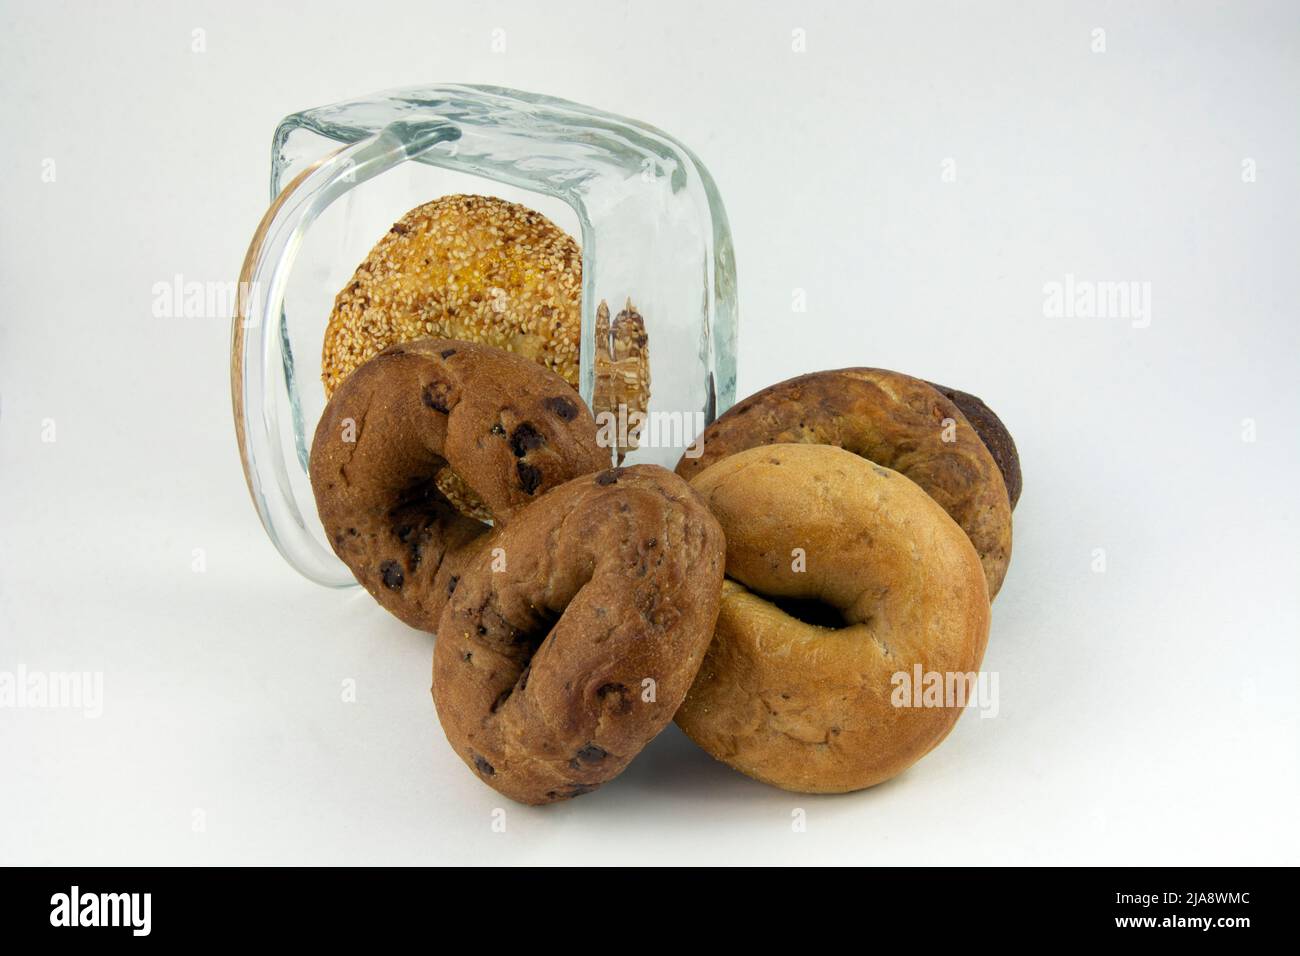 Variety of cinnamon raisin, sesame seed, and pumpernickel bagels inside and overflowing from overturned glass basket Stock Photo